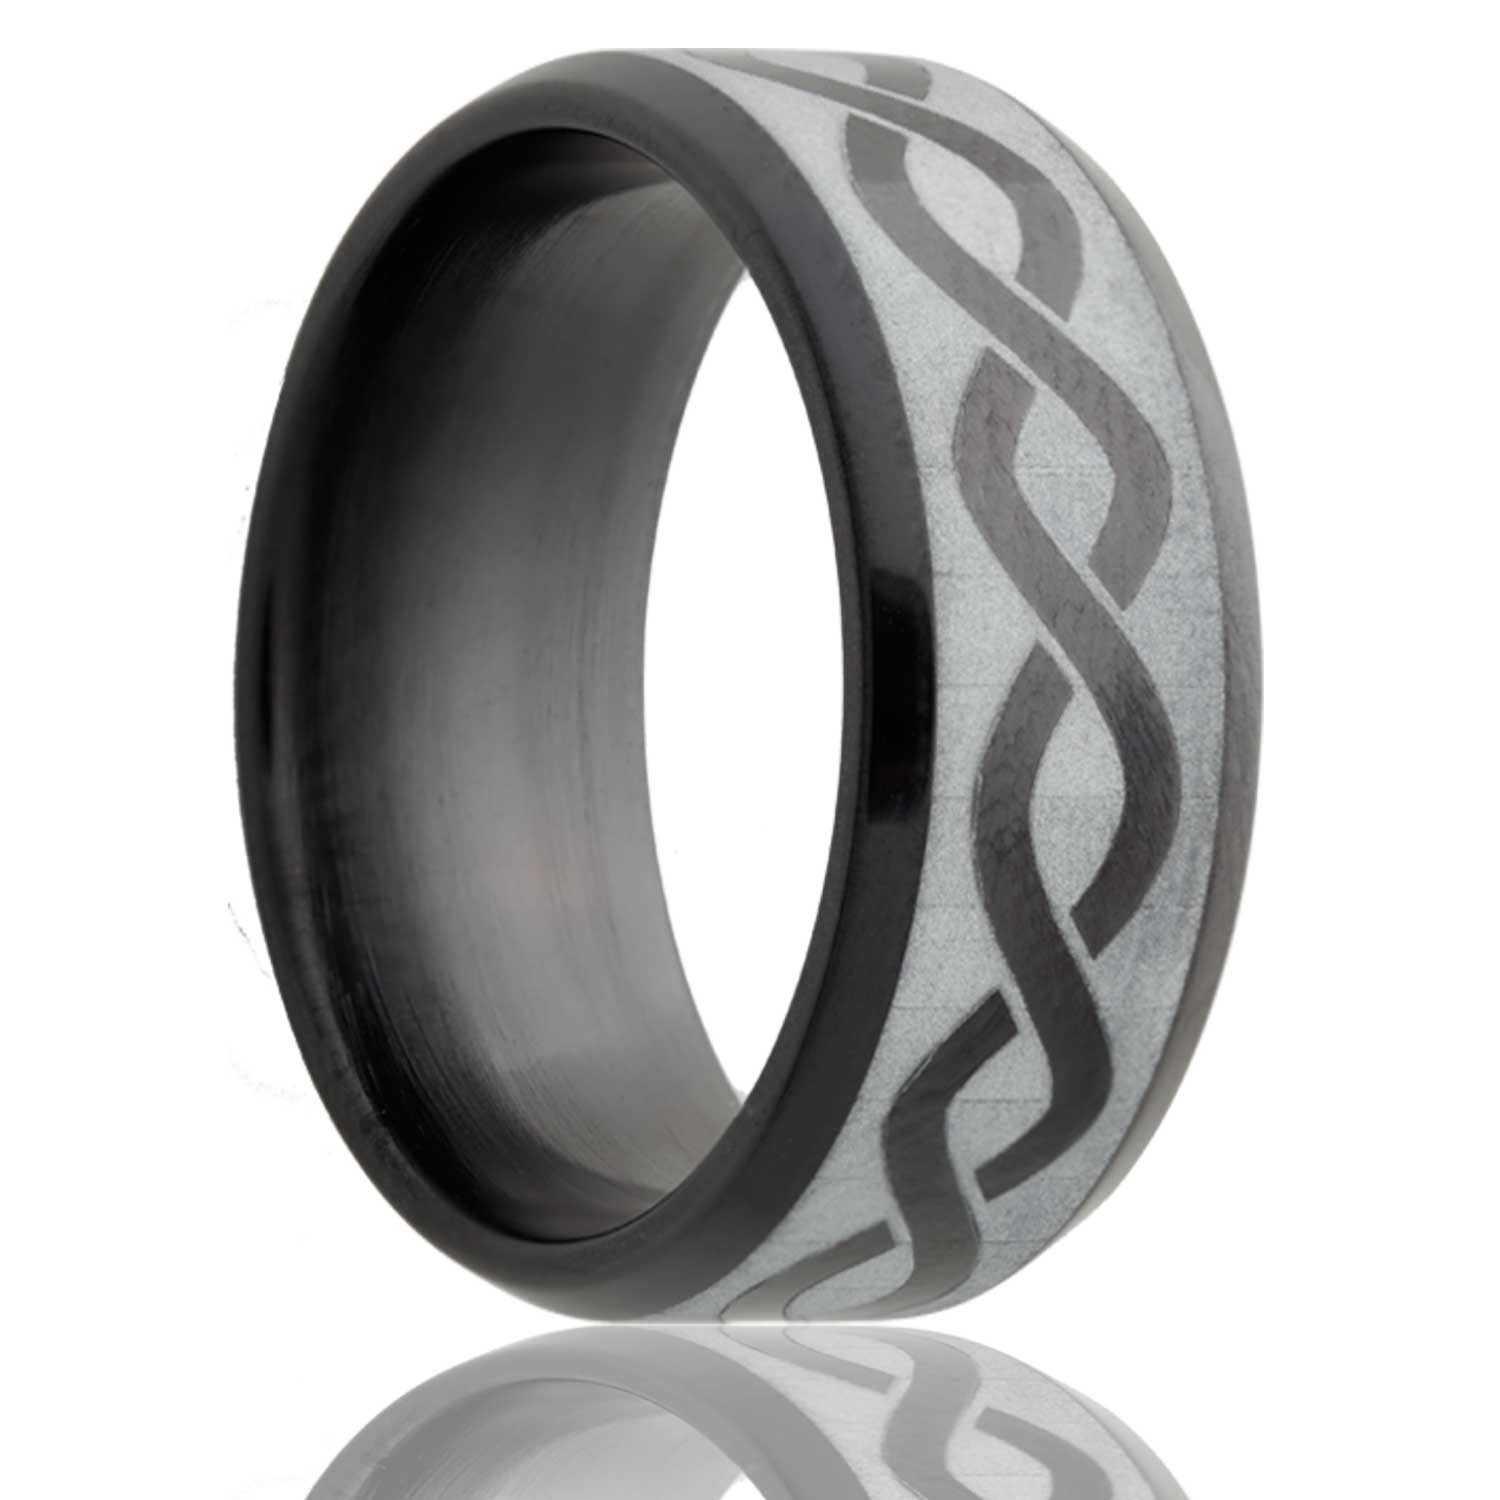 A infinity waves zirconium wedding band with beveled edges displayed on a neutral white background.